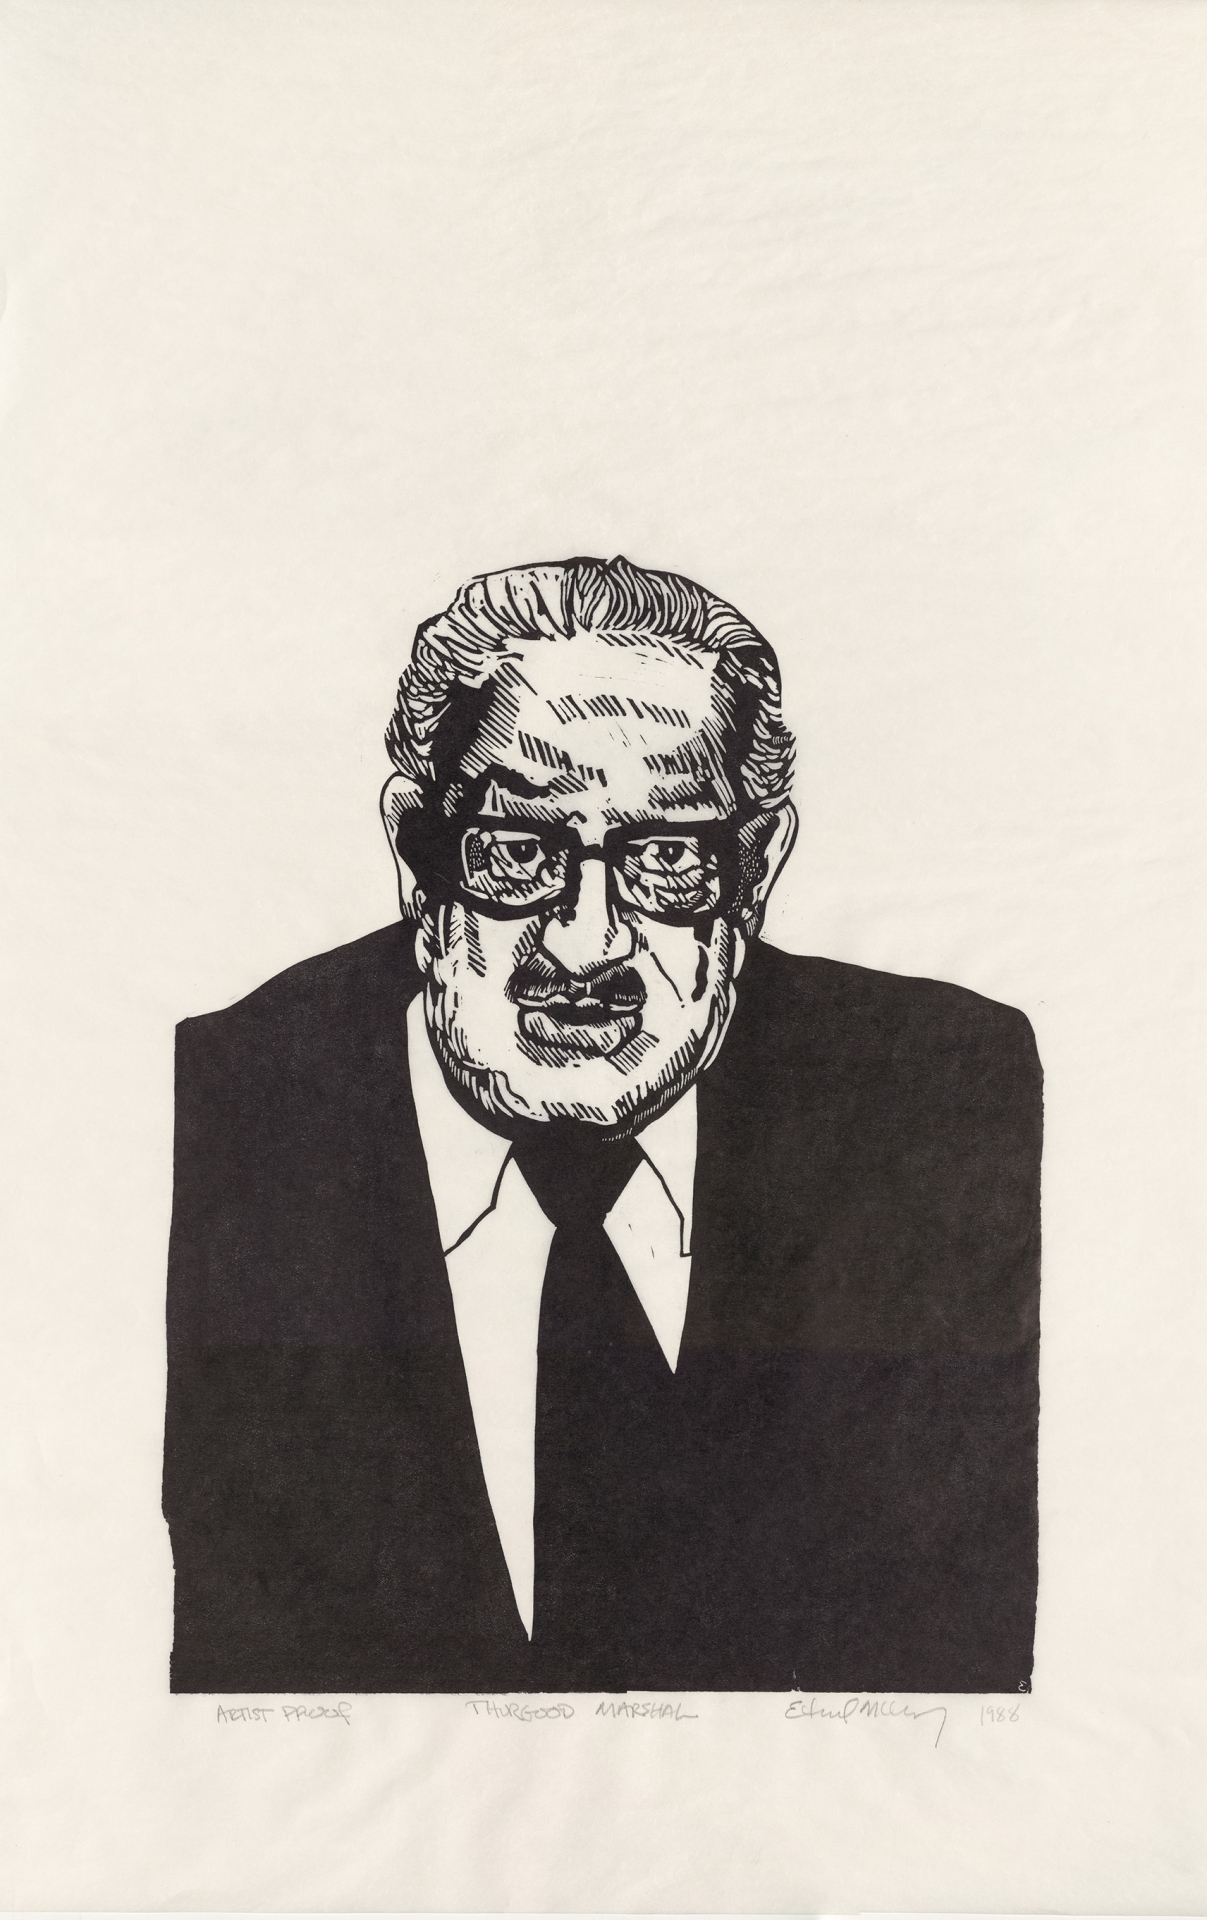 Bust-length portrait of an esteemed-looking older man wearing a suit and tie and thick-framed glasses. The solidity of form gives the figure a monumental bearing. The name Thurgood Marshall is written at the bottom of the portrait. Linocut by Edward McCluney.